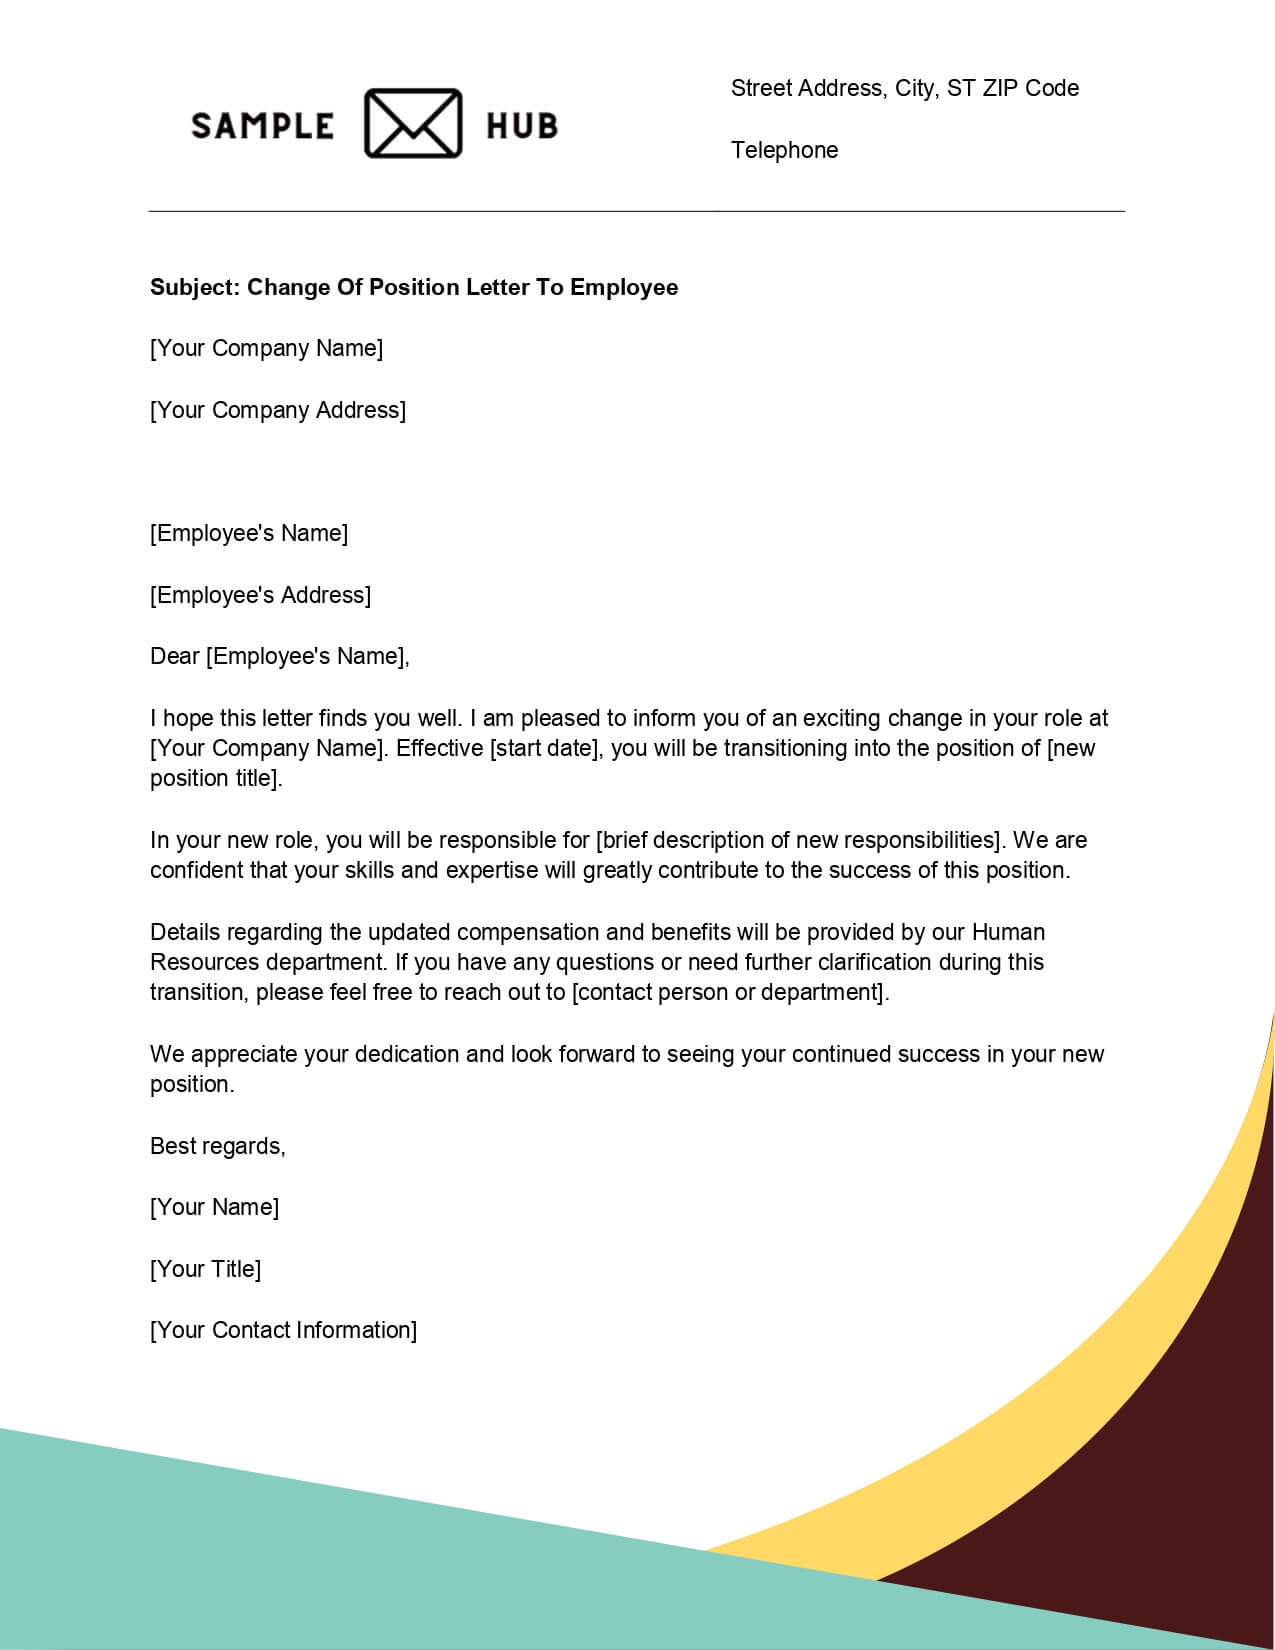 Change Of Position Letter To Employee